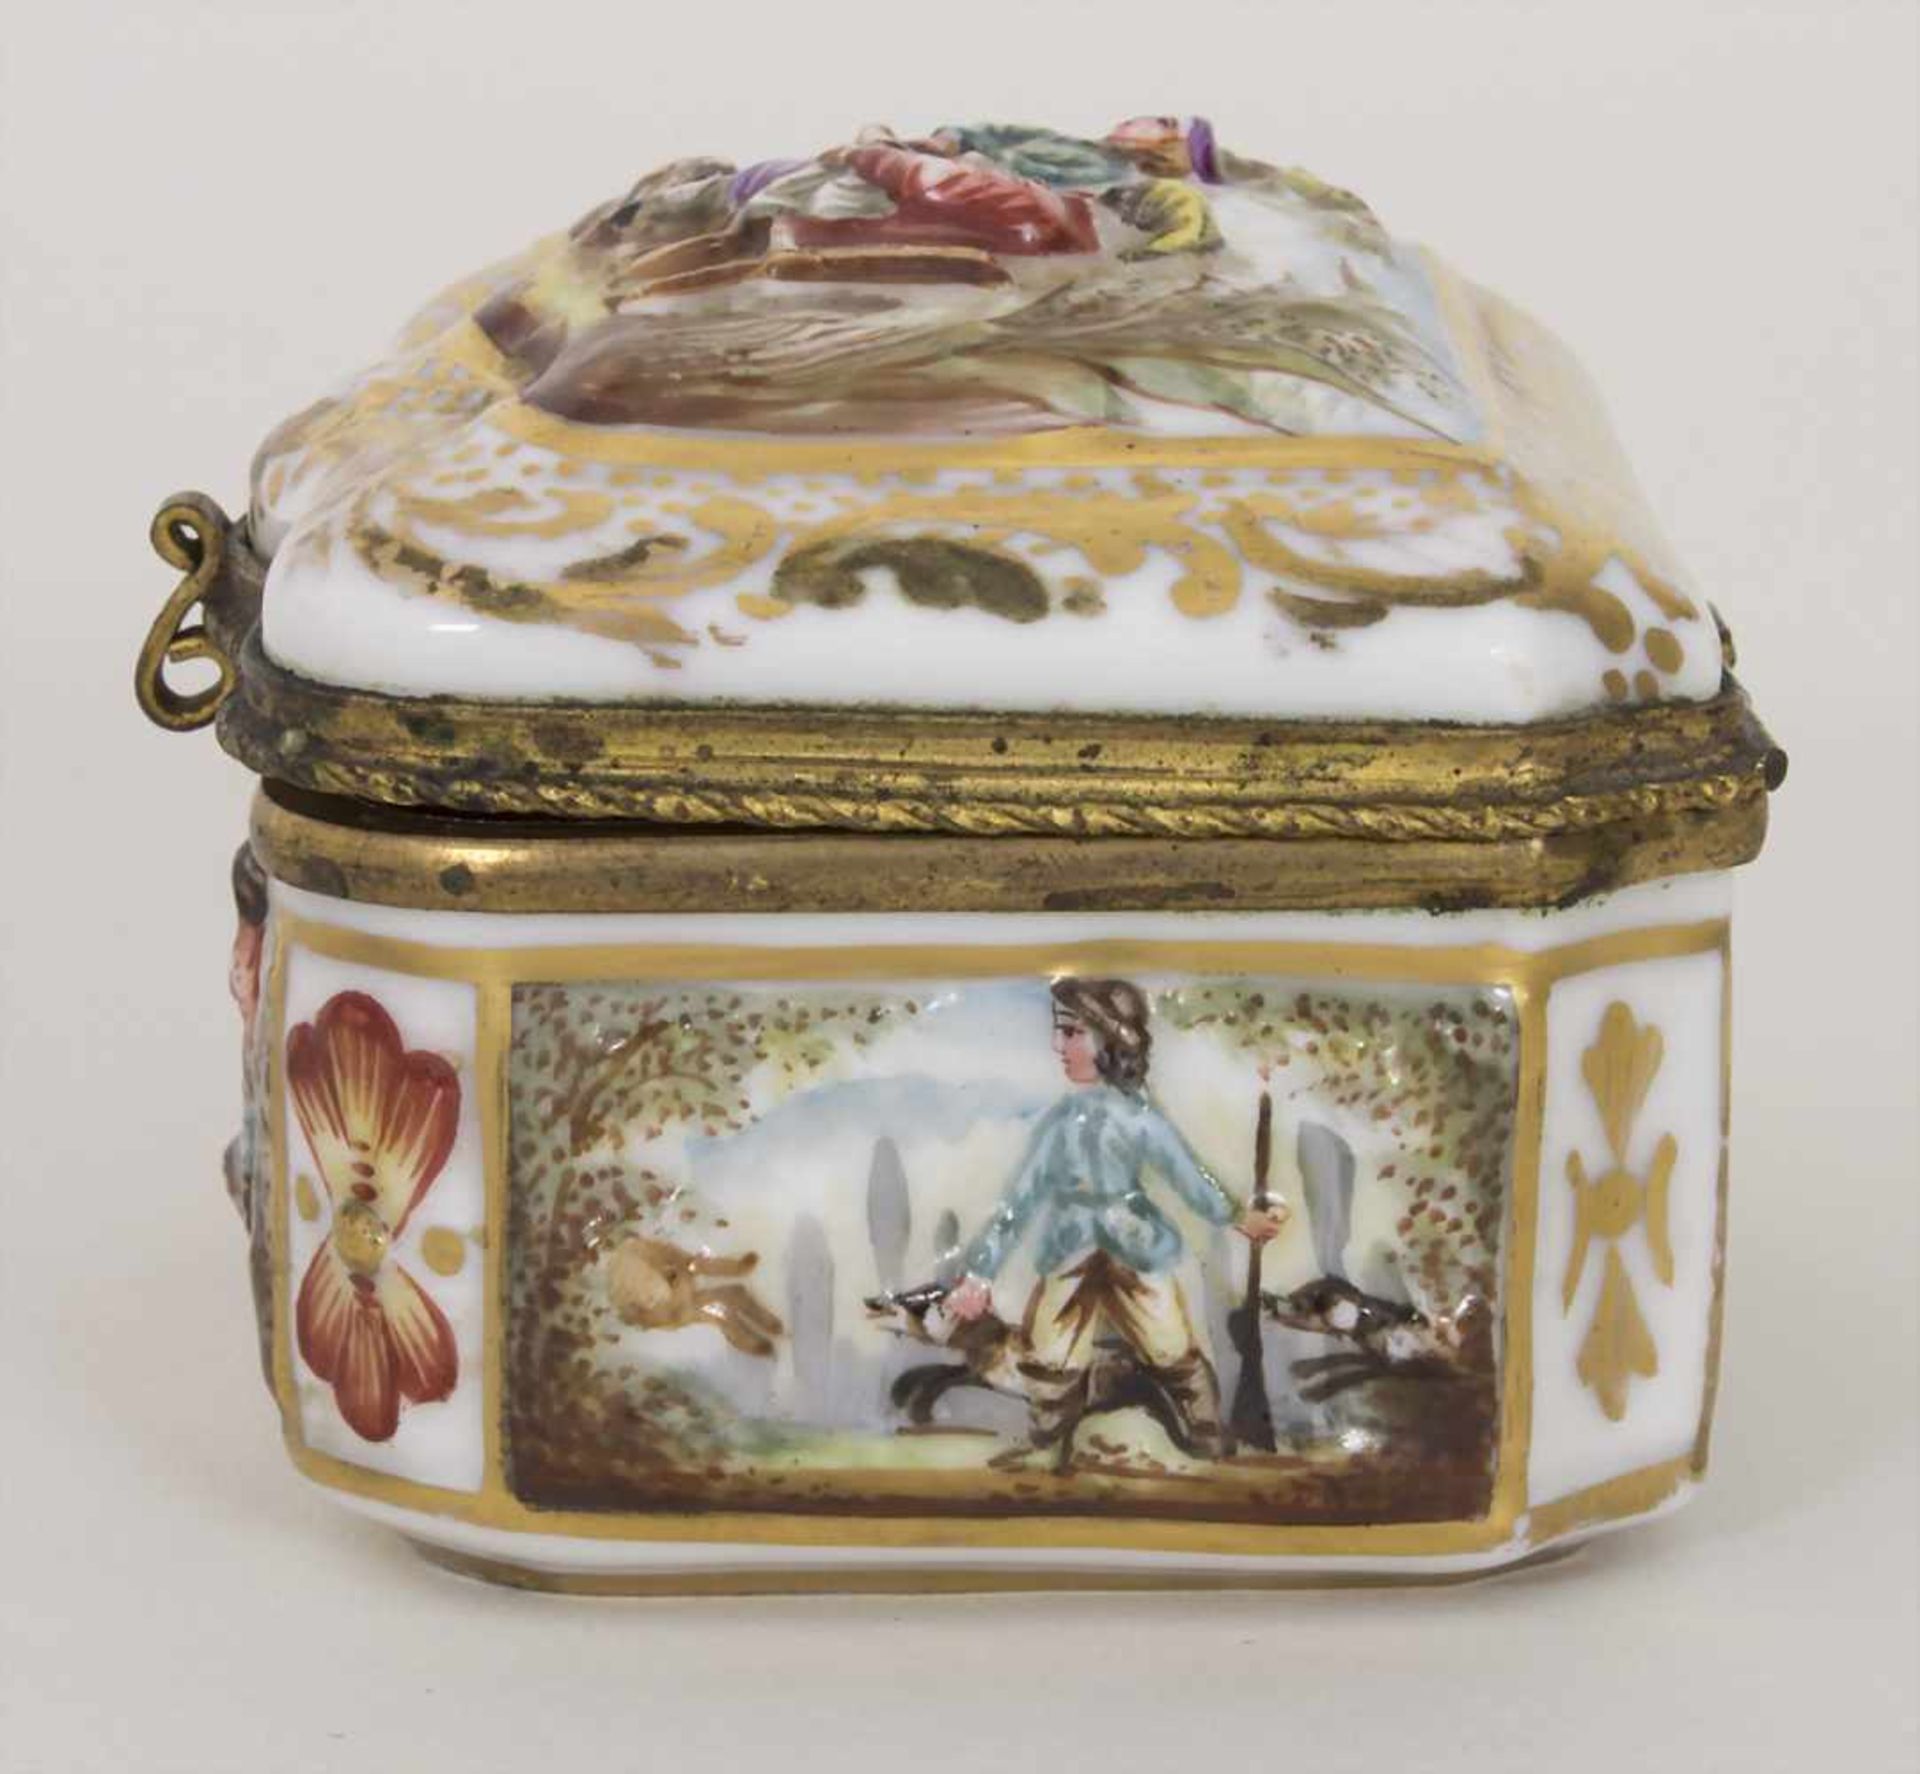 Deckeldose / Tabatiere mit Kartenspielern und Jagdszenen / A snuff box with card players and hunting - Image 2 of 8